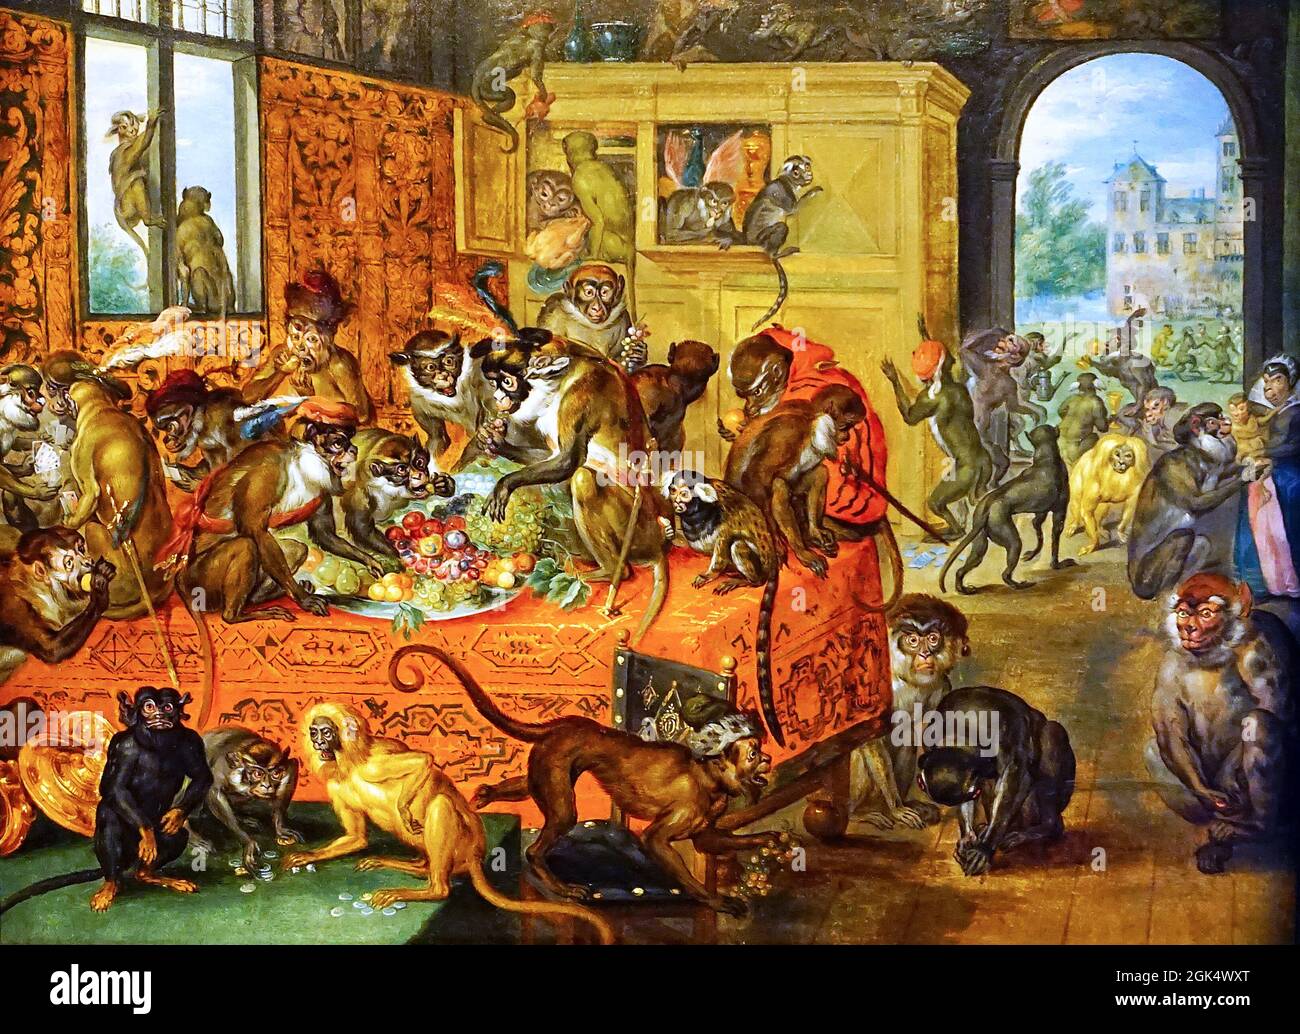 Singerie by Jan Breughel I (1568-1625) This type of painting was called a singerie,portraying monkeys dressed as humans. Stock Photo